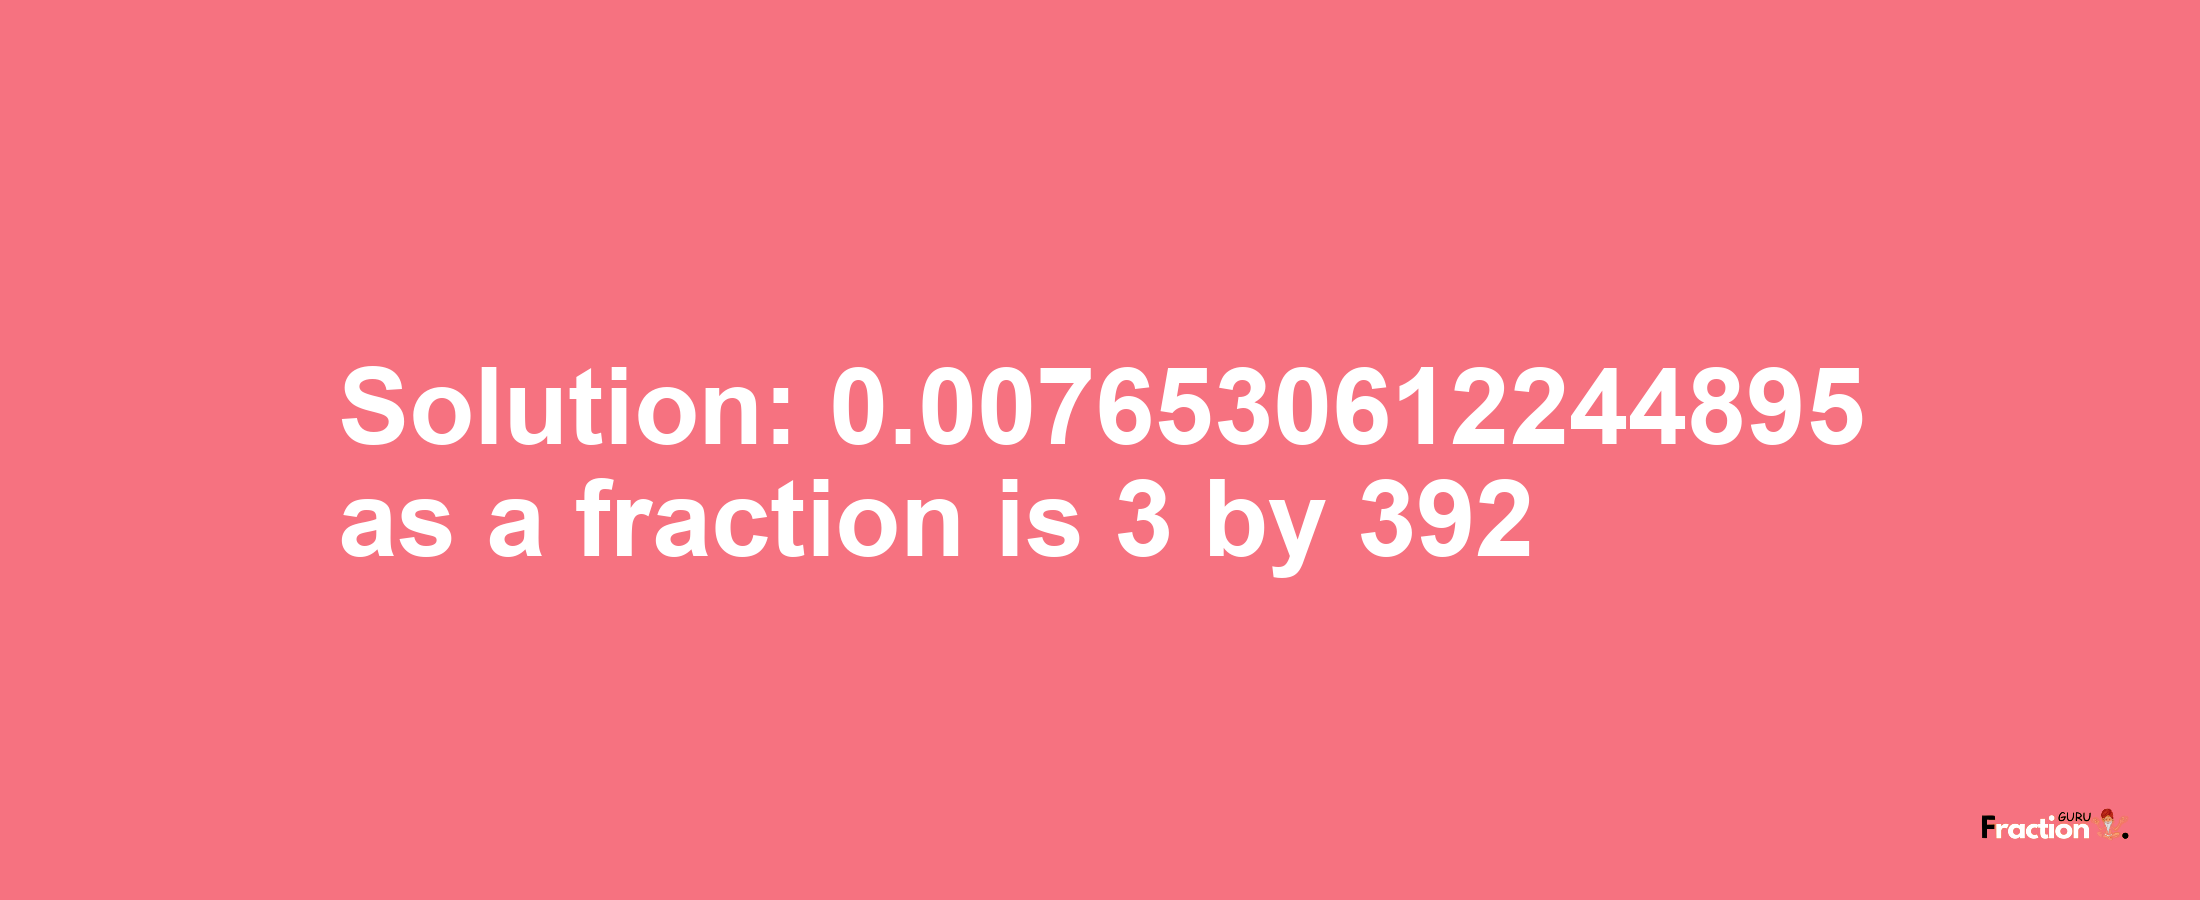 Solution:0.0076530612244895 as a fraction is 3/392